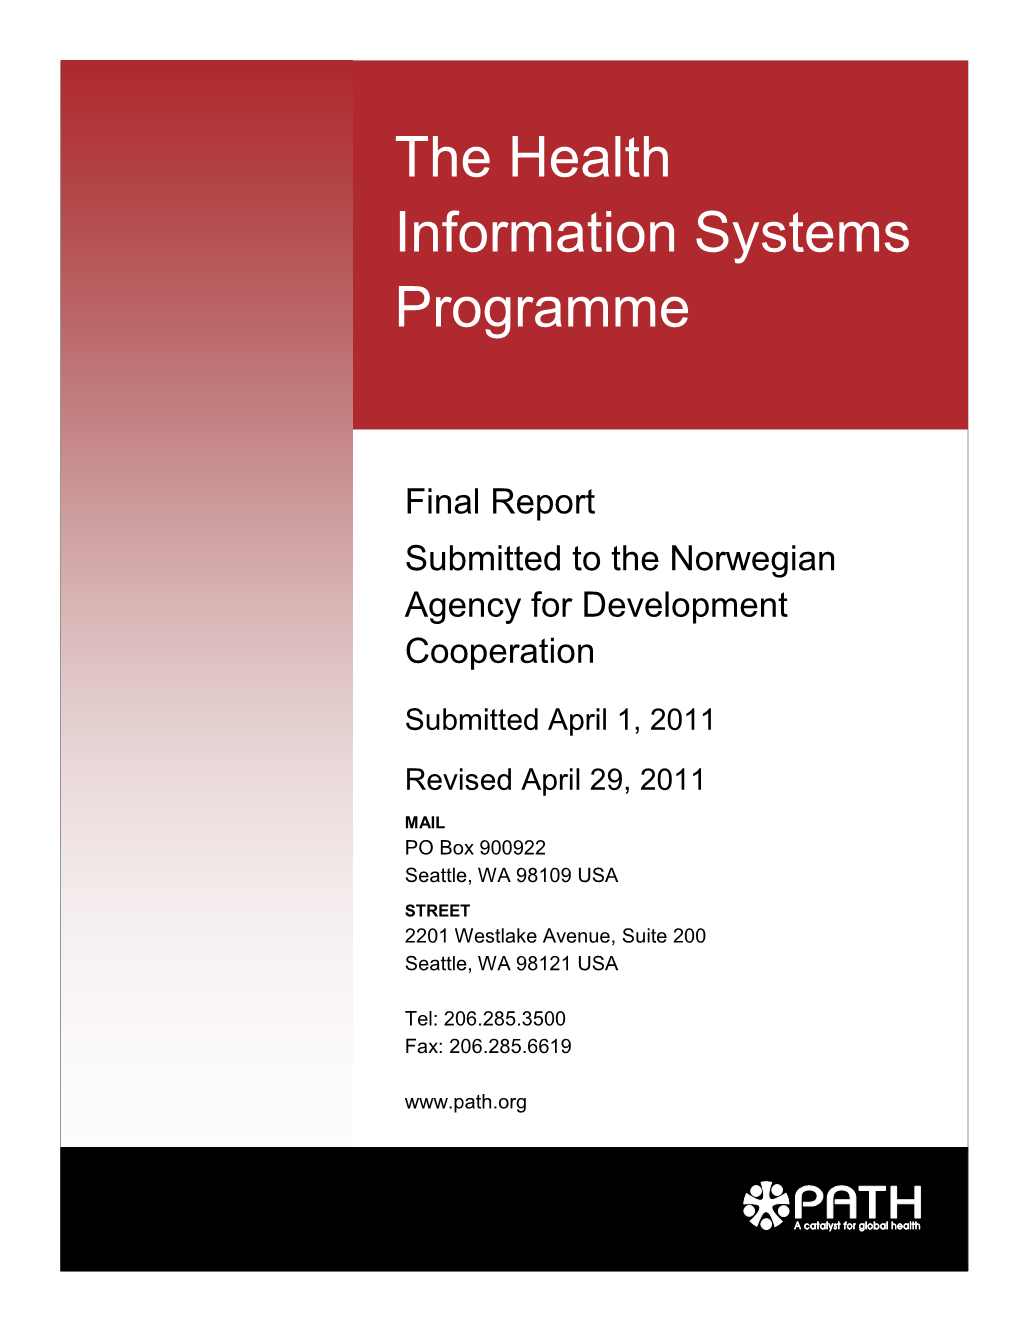 The Health Information Systems Programme: Final Report